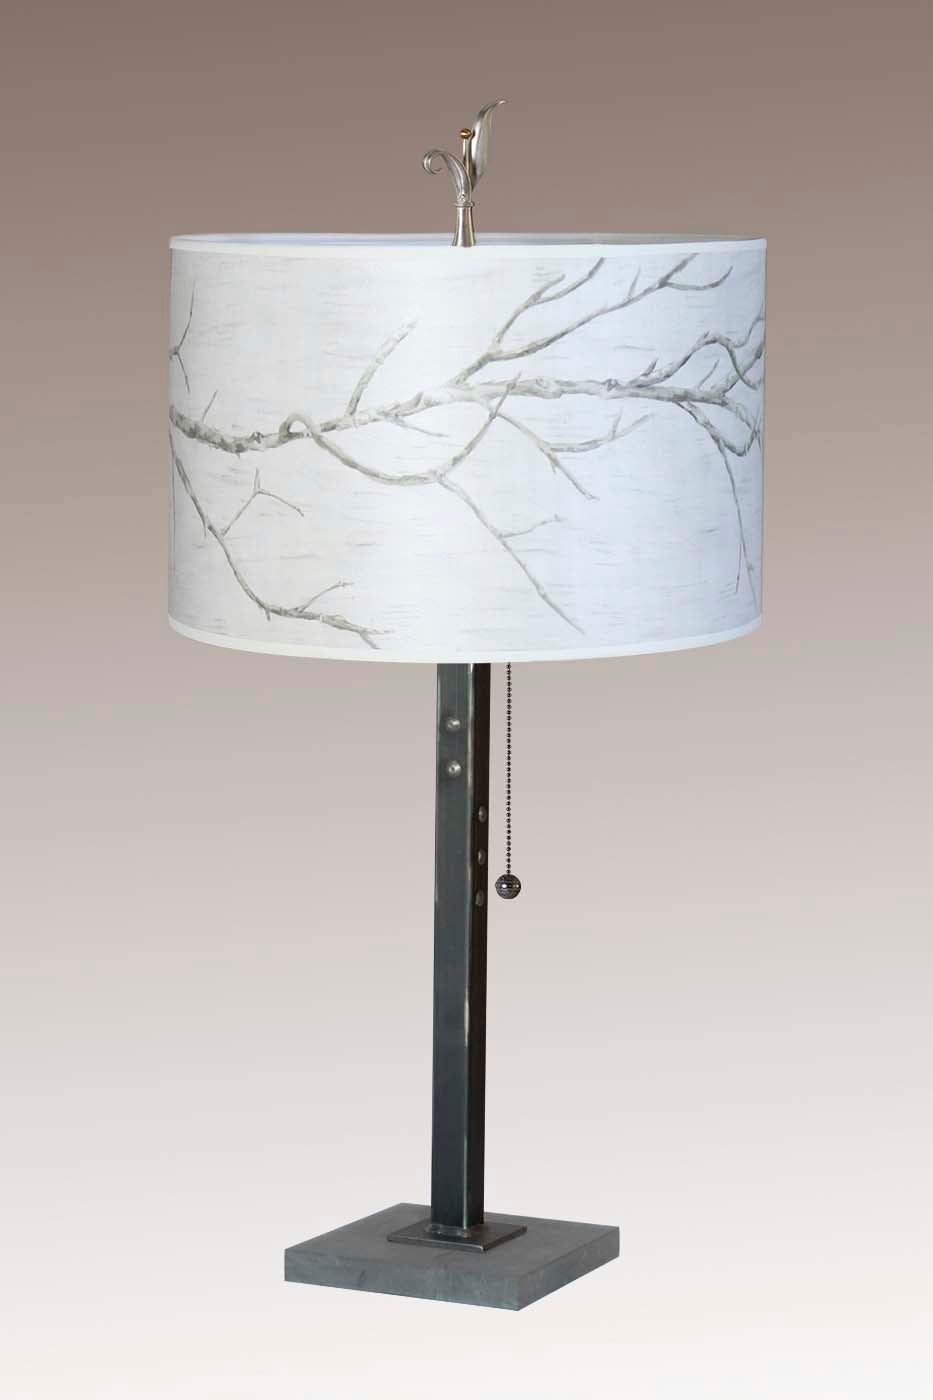 Janna Ugone & Co Table Lamp Steel Table Lamp with Large Drum Shade in Sweeping Branch